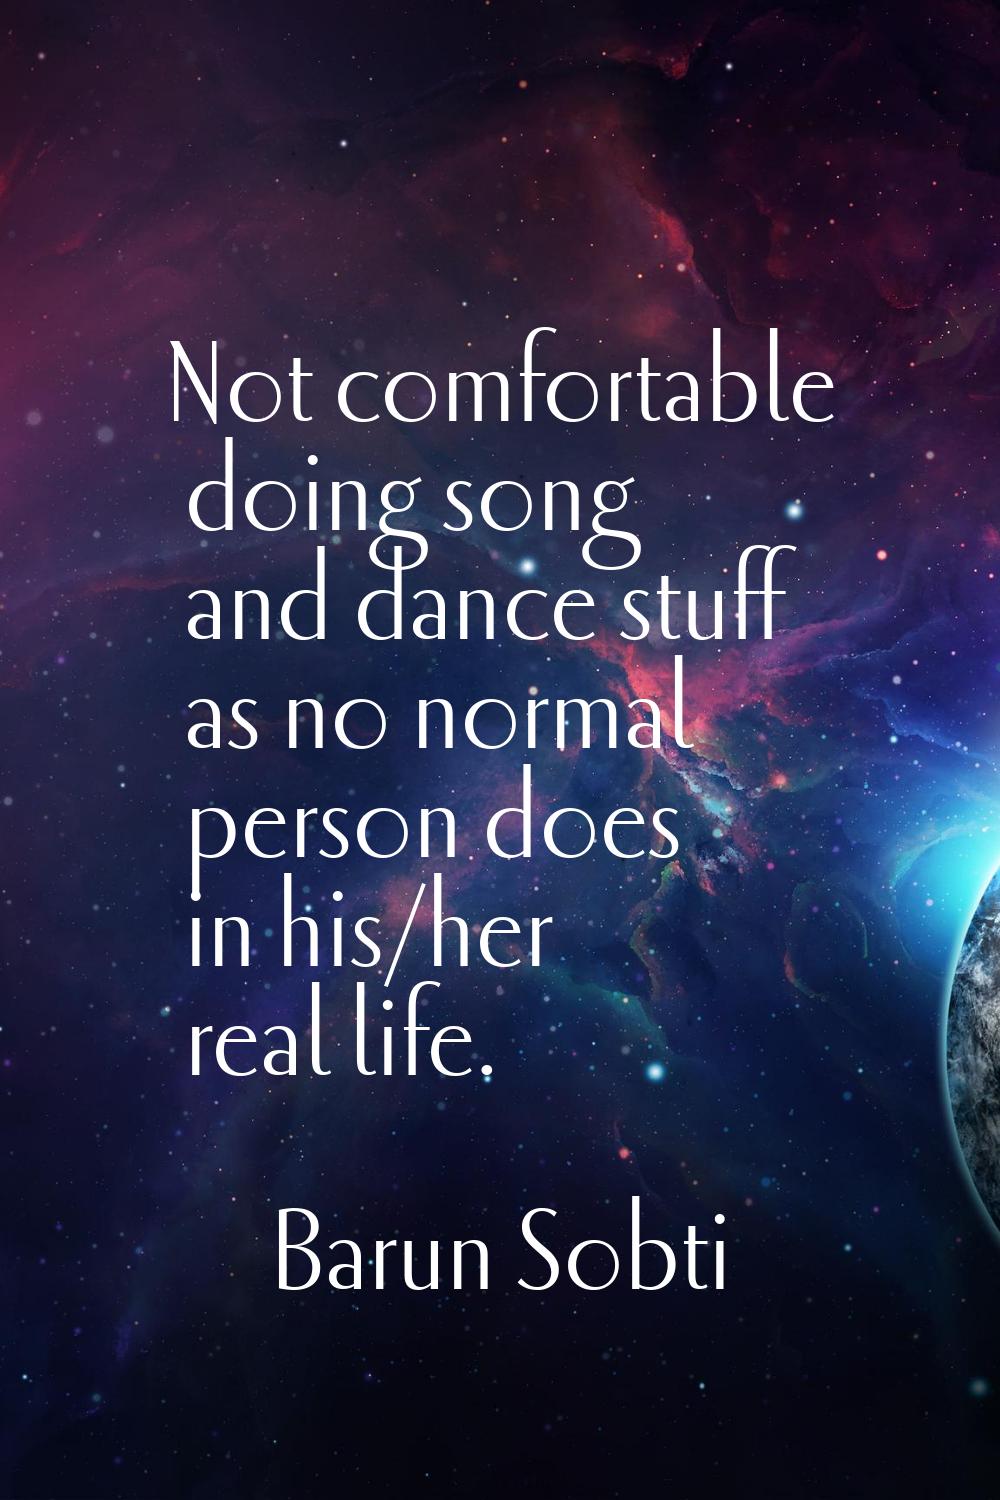 Not comfortable doing song and dance stuff as no normal person does in his/her real life.